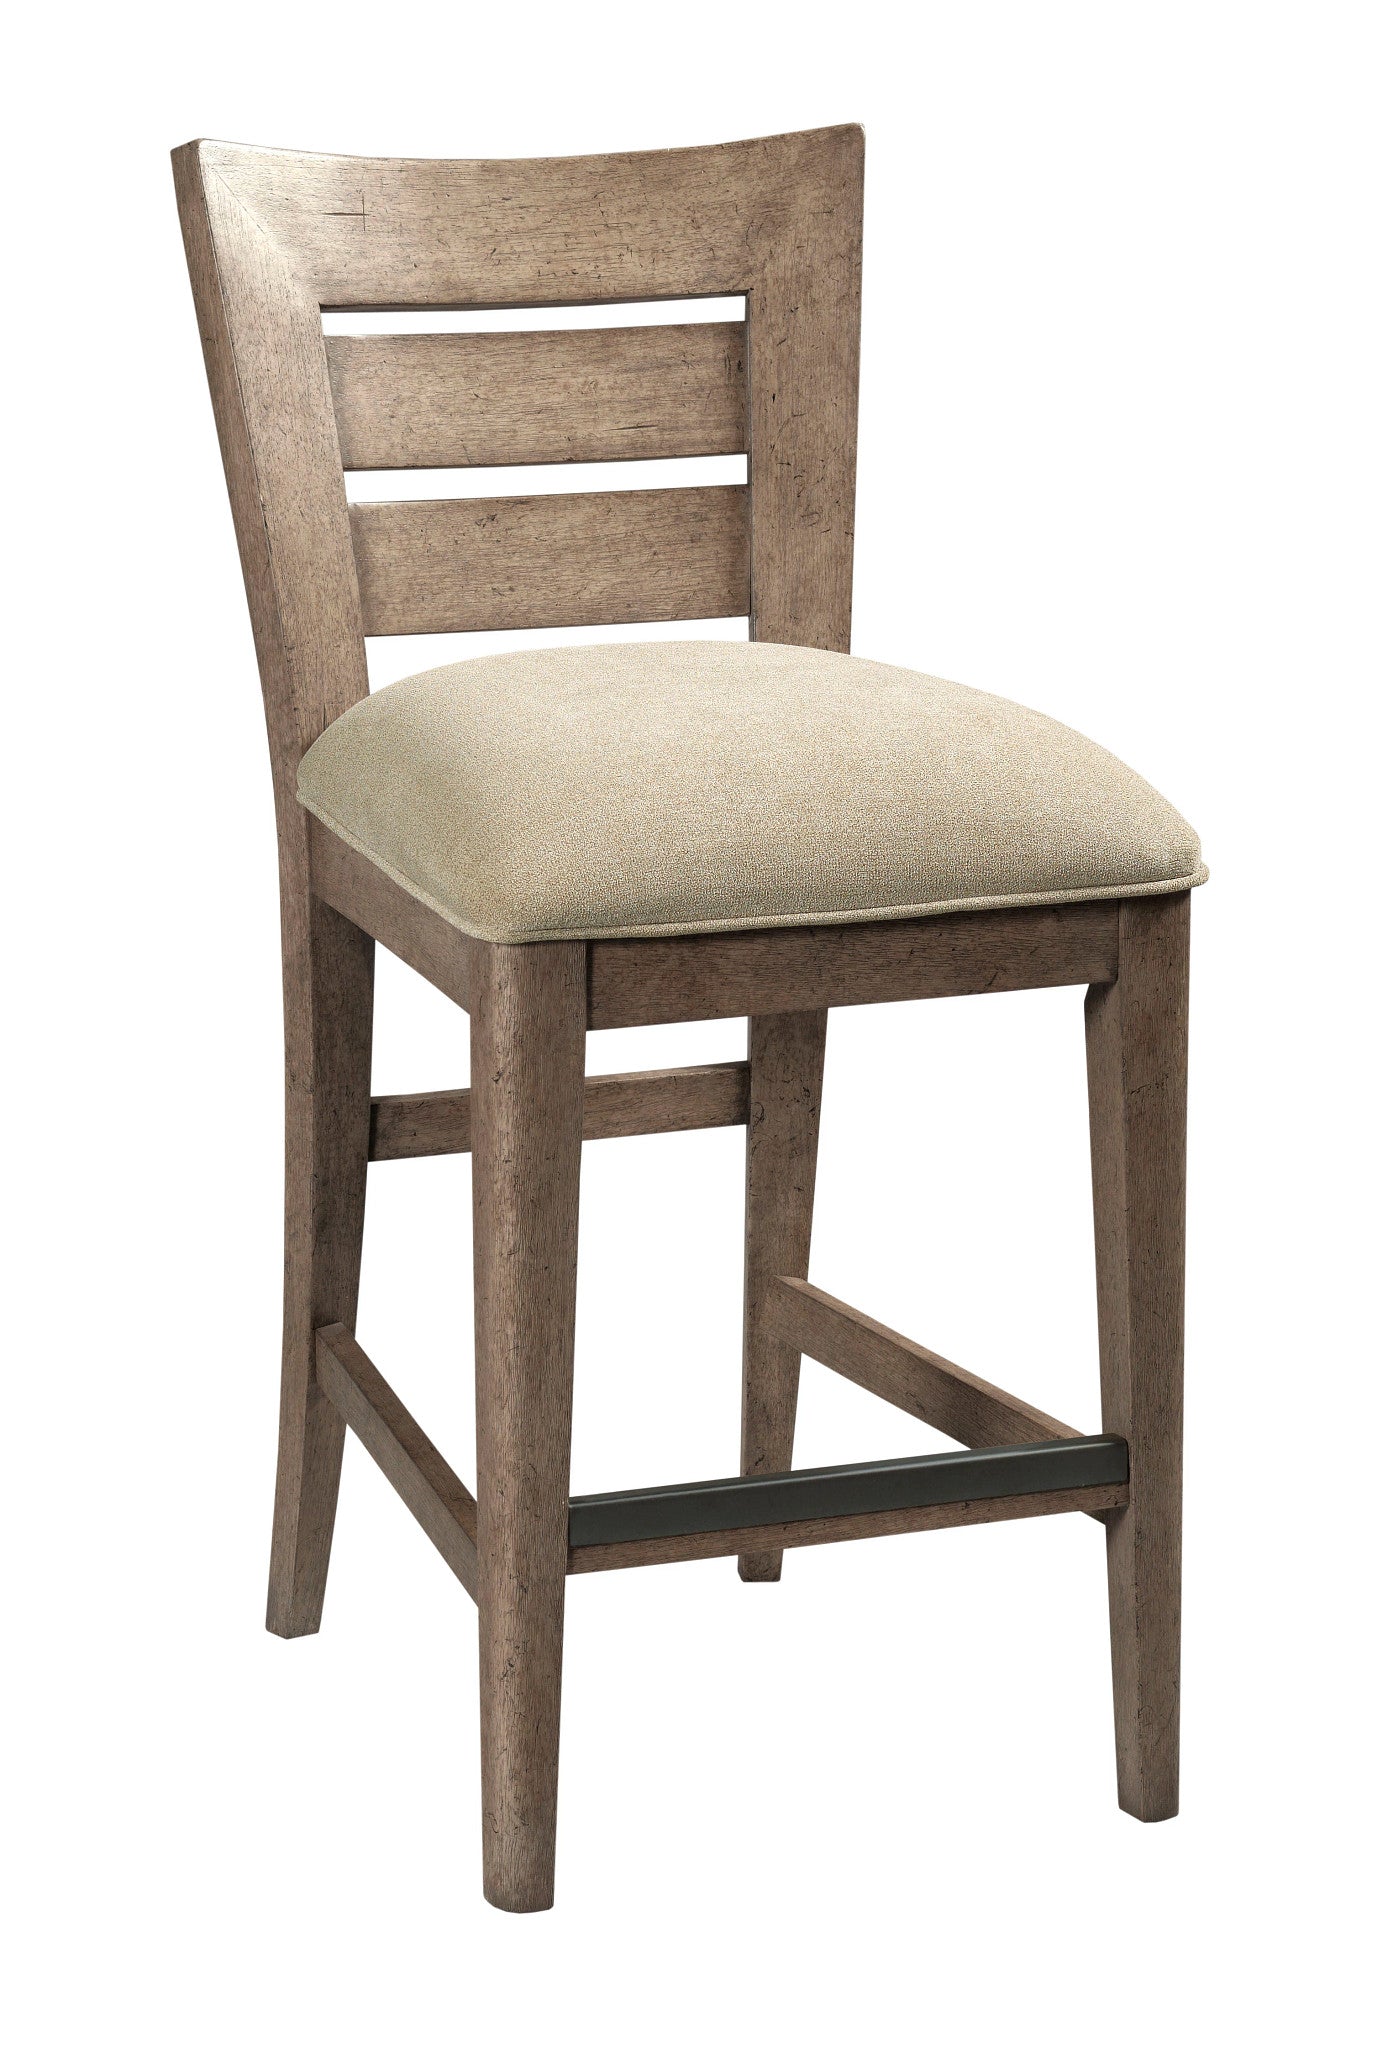 COUNTER HEIGHT CHAIR